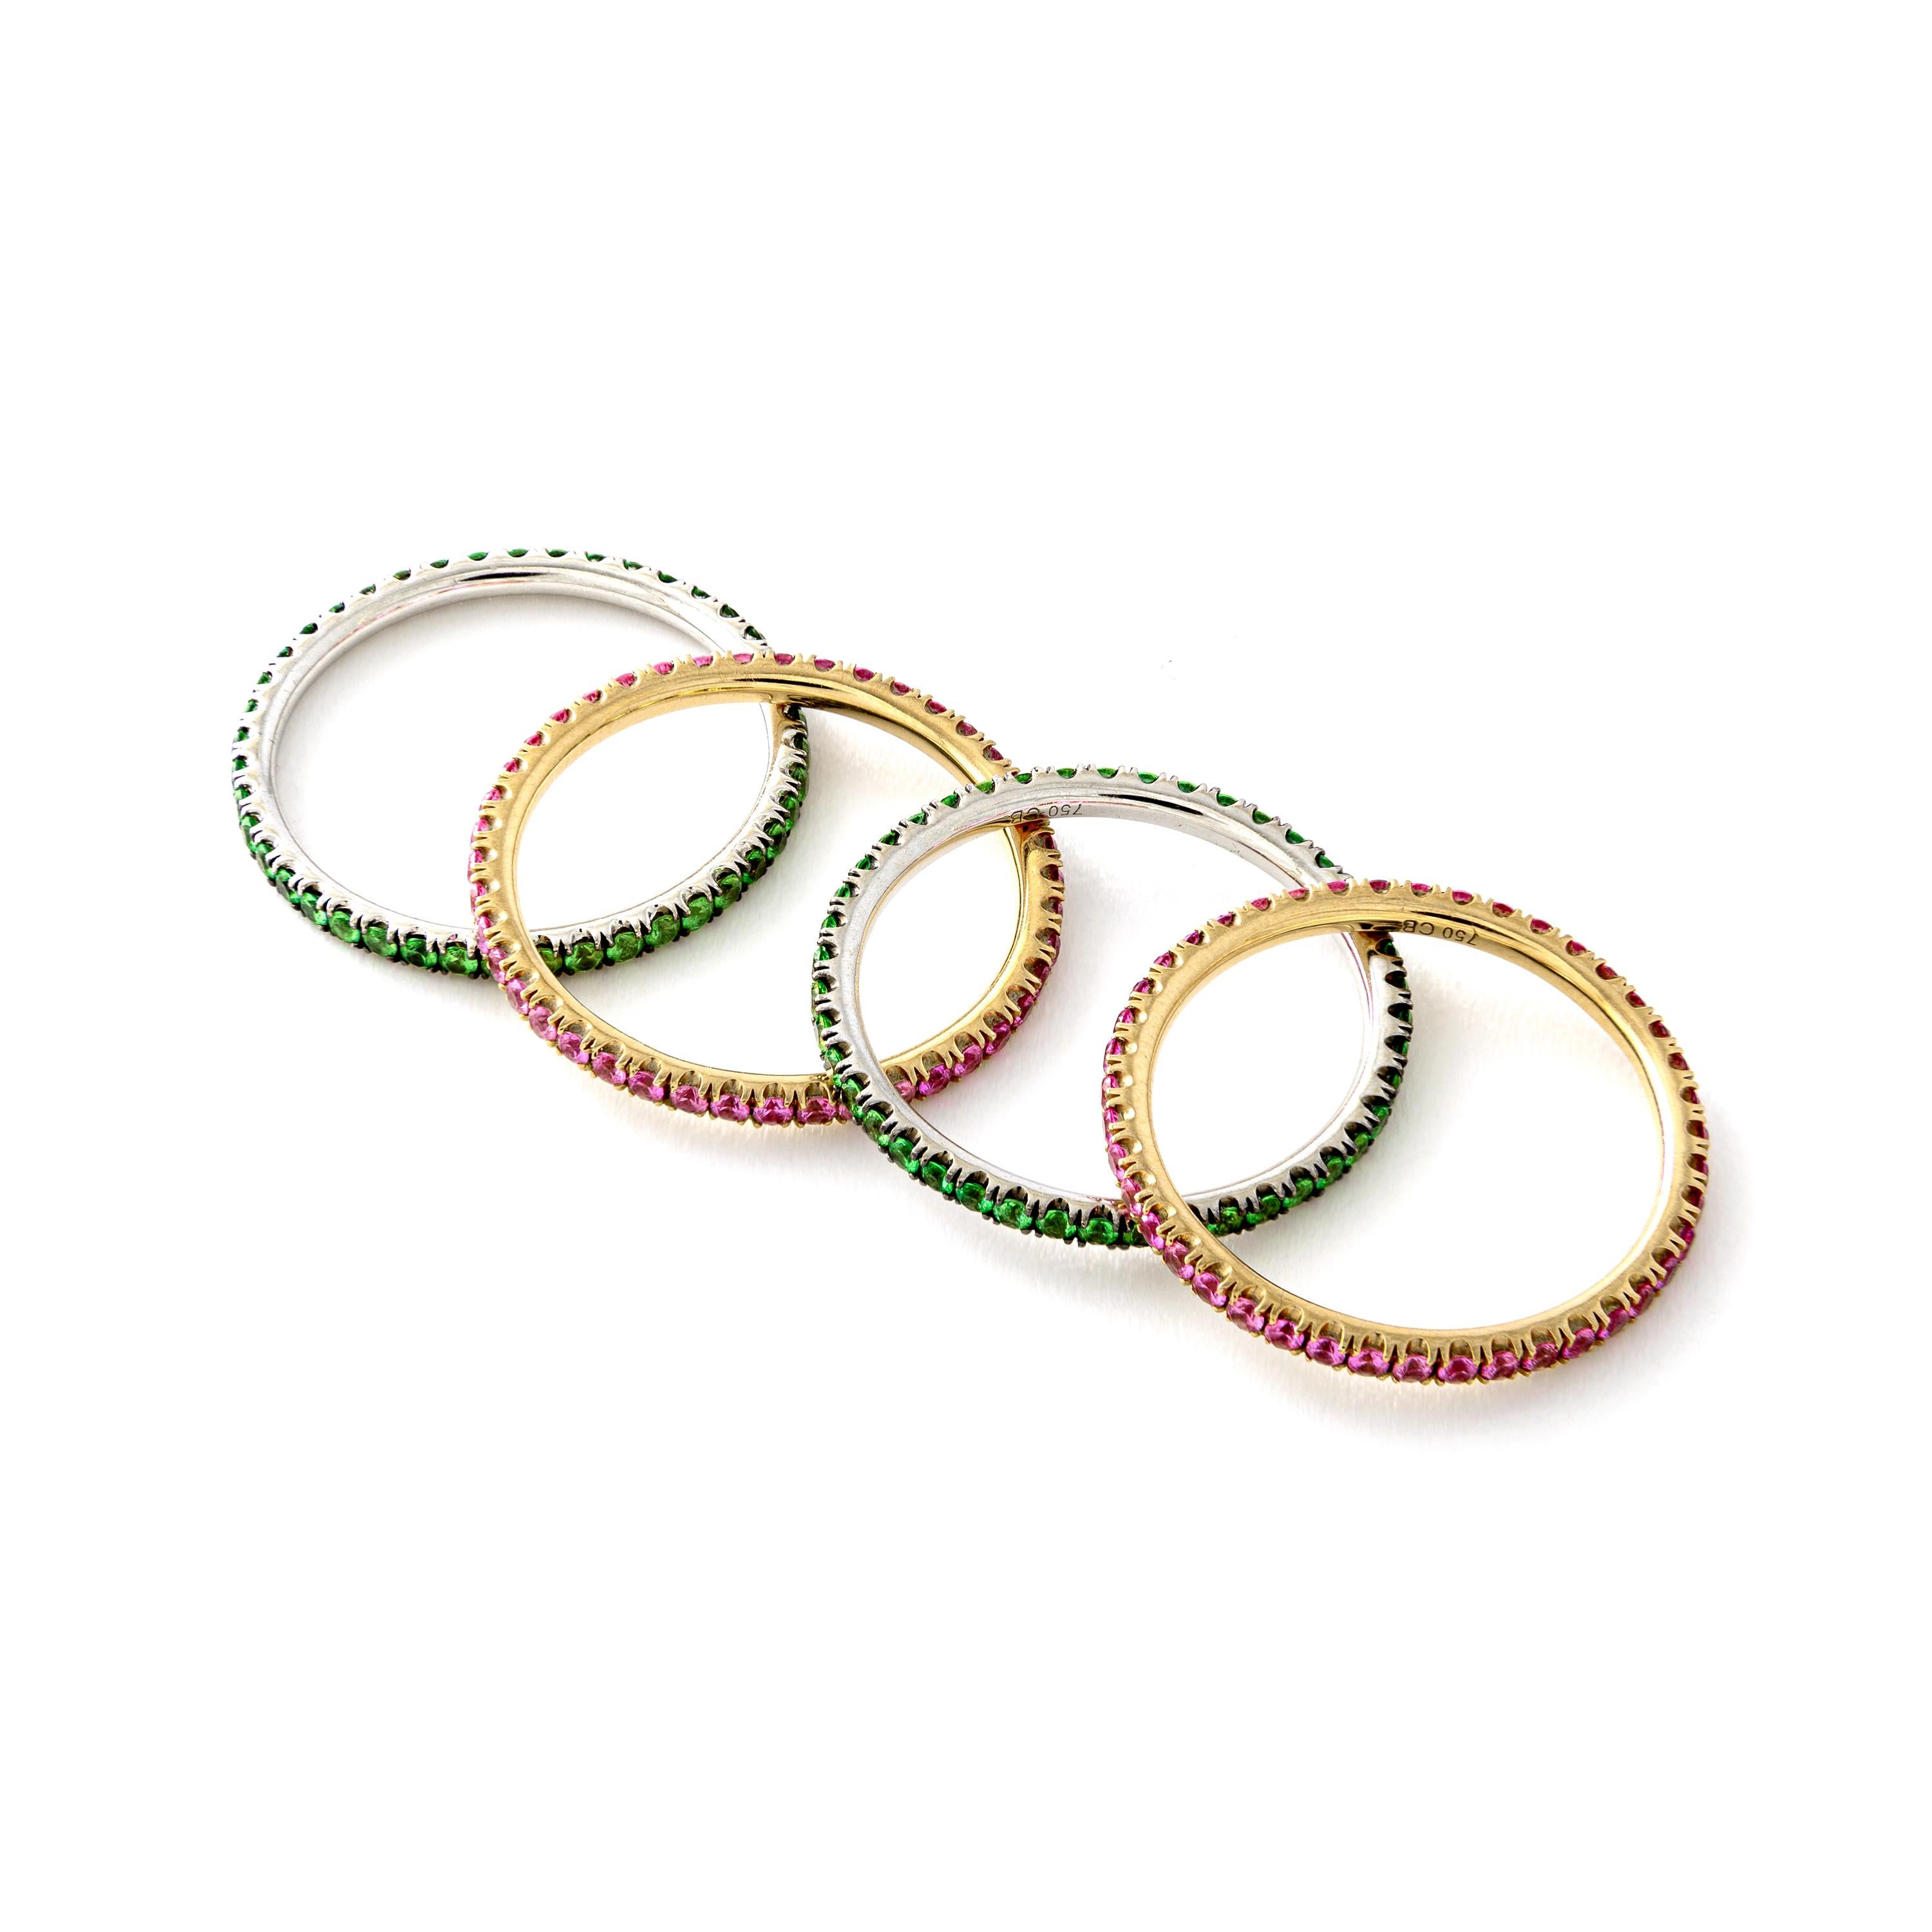 Four Green Garnet and Pink Sapphire respectively on white and rose Gold Band Rings.
Contemporary.
Size: 7 US.

